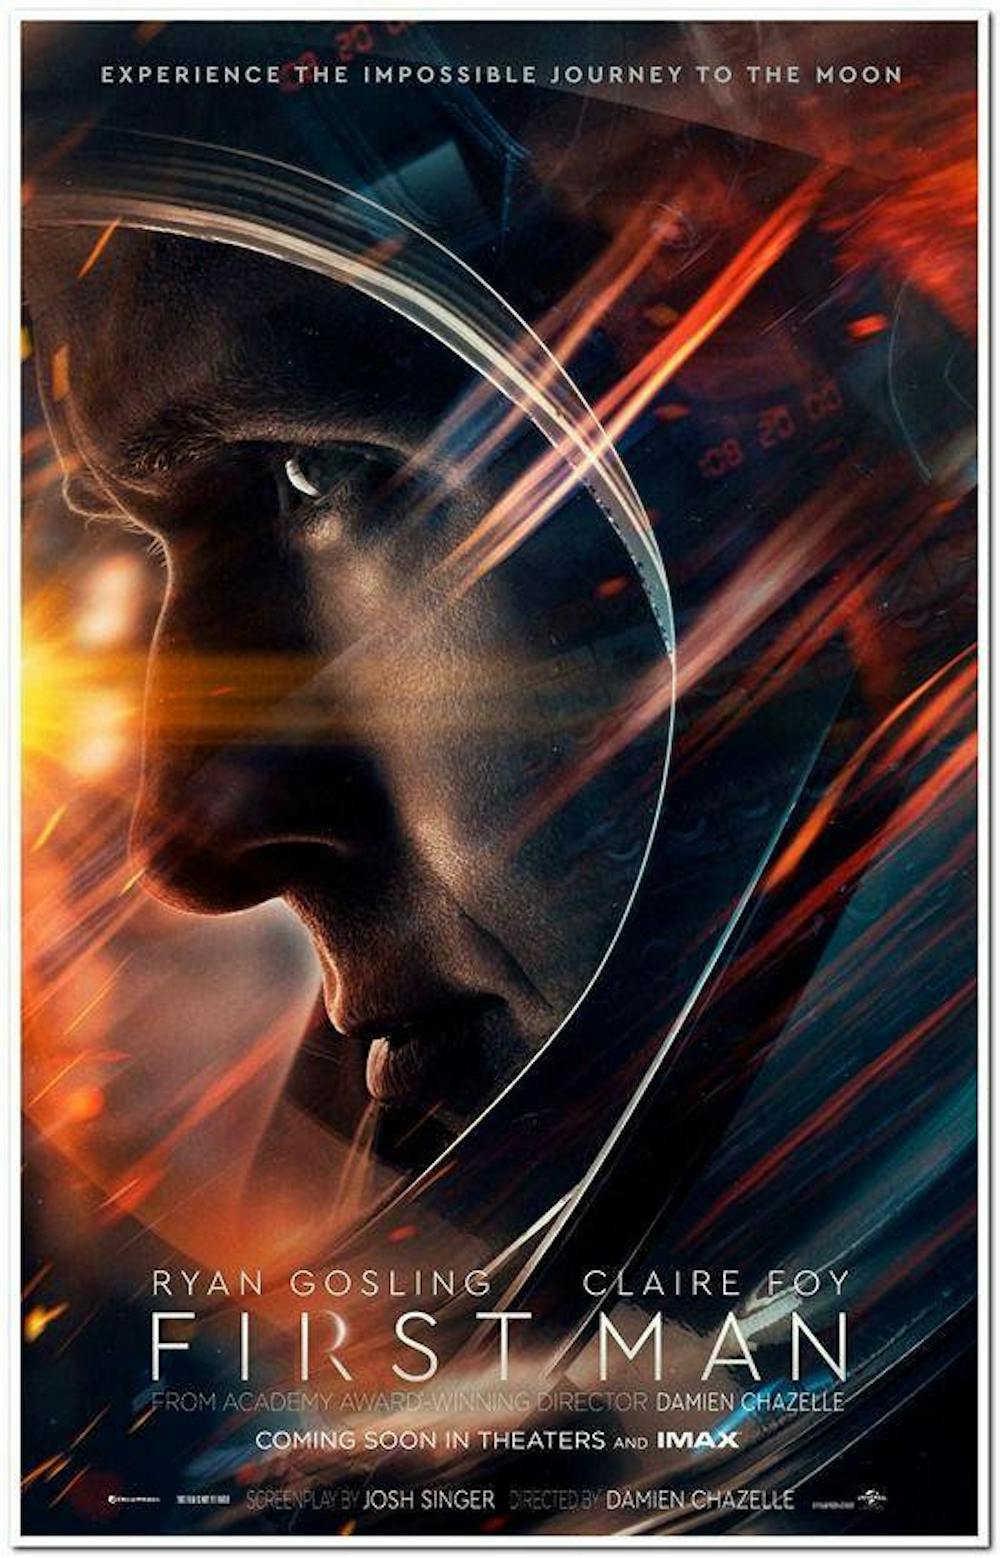 <span class="photocreditinline">UNIVERSAL PICTURES</span><br />"First man" features Ryan Gosling as Neil Armstrong.